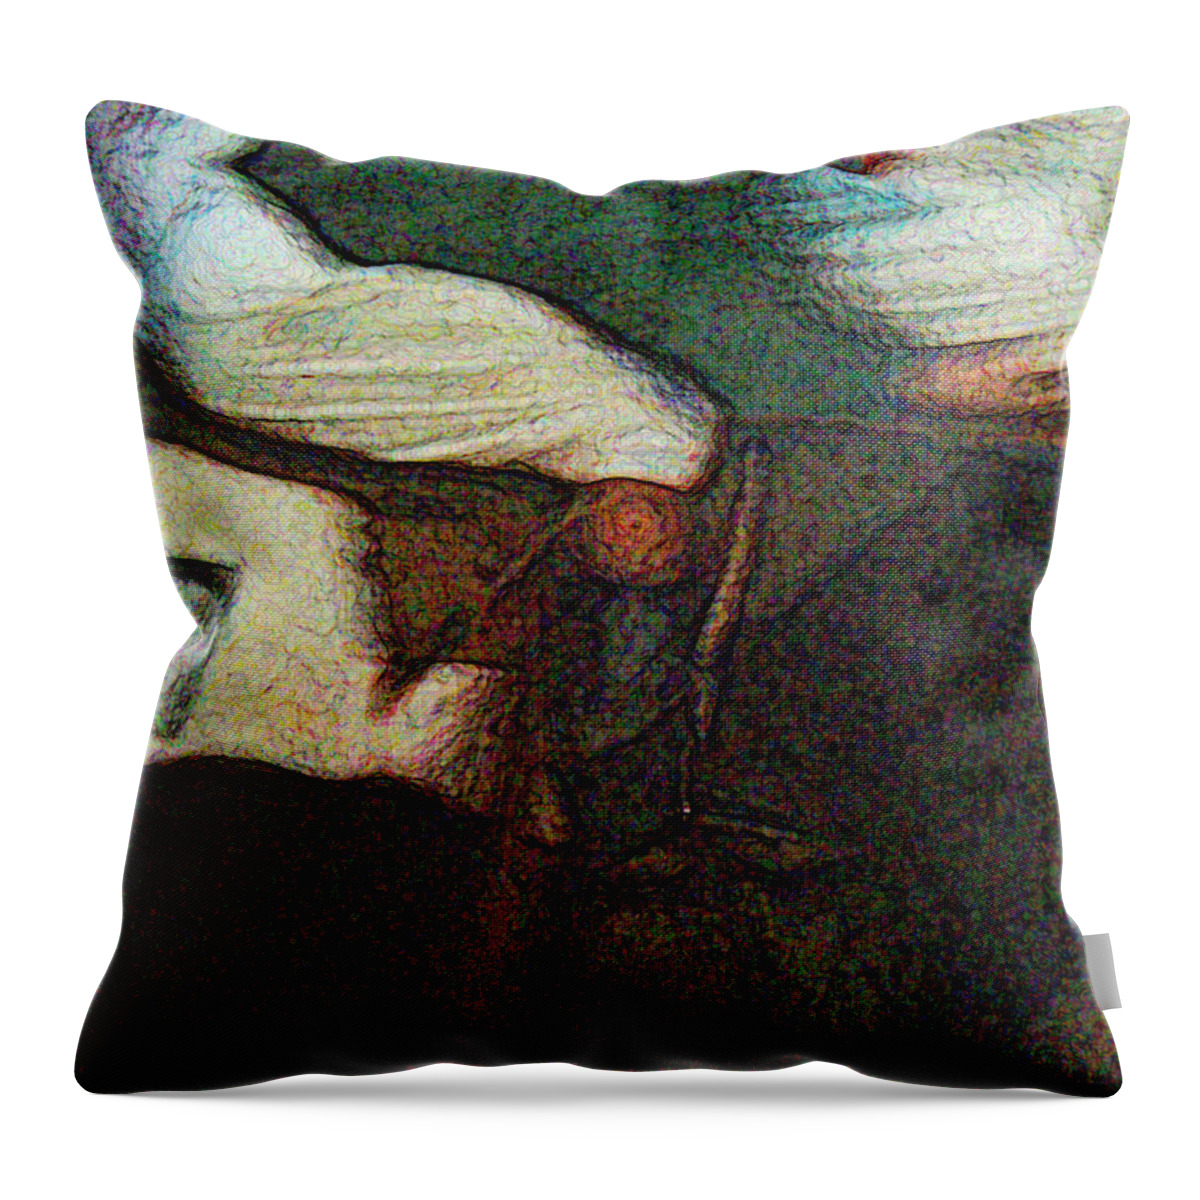 Abstract Throw Pillow featuring the painting No. 7 by Susan Esbensen